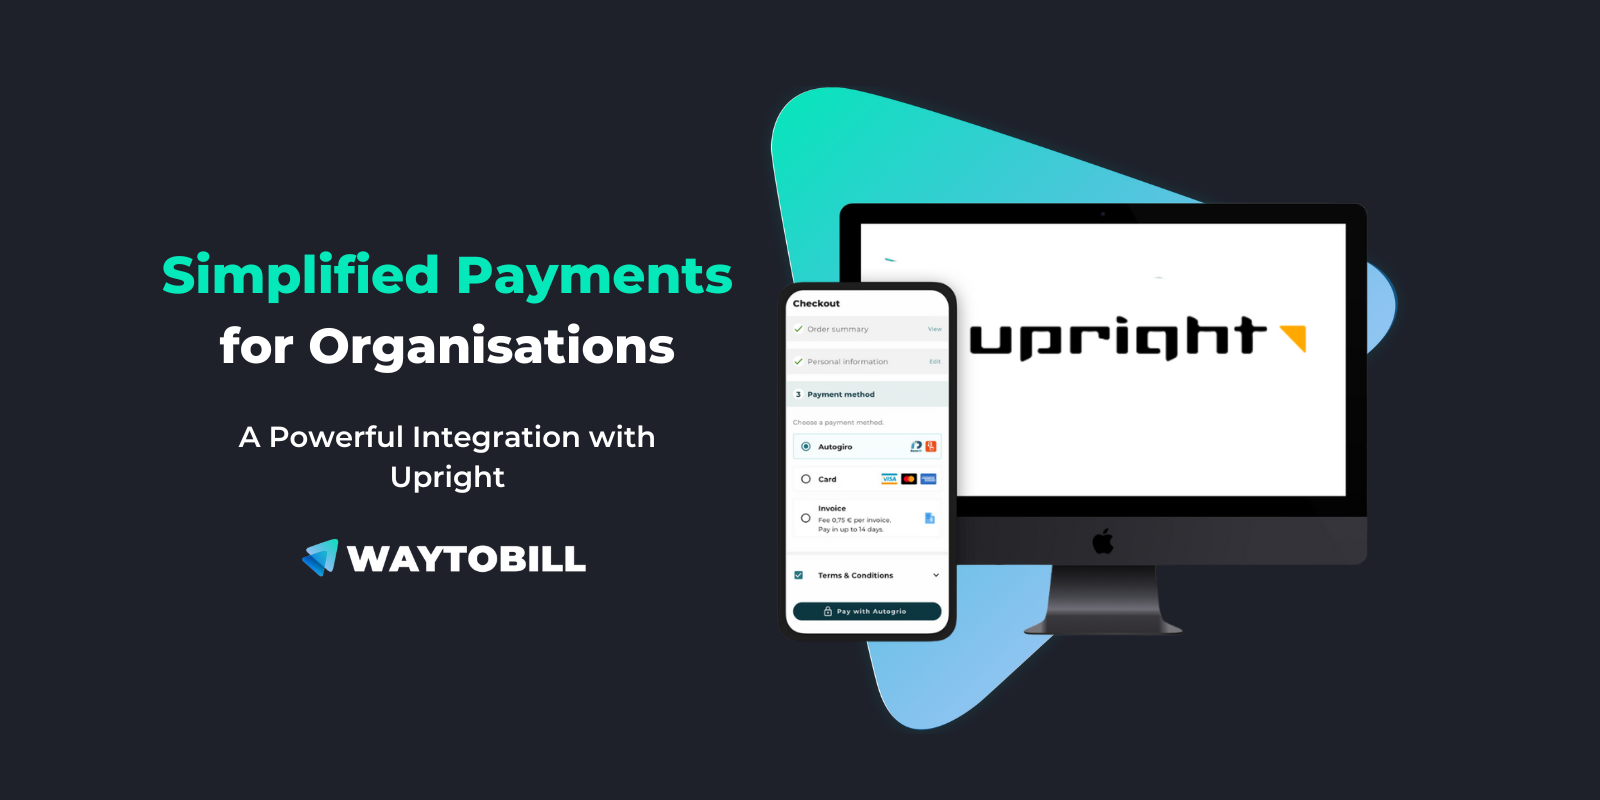 How Waytobill and Upright Simplify Payment Processes for Organisations